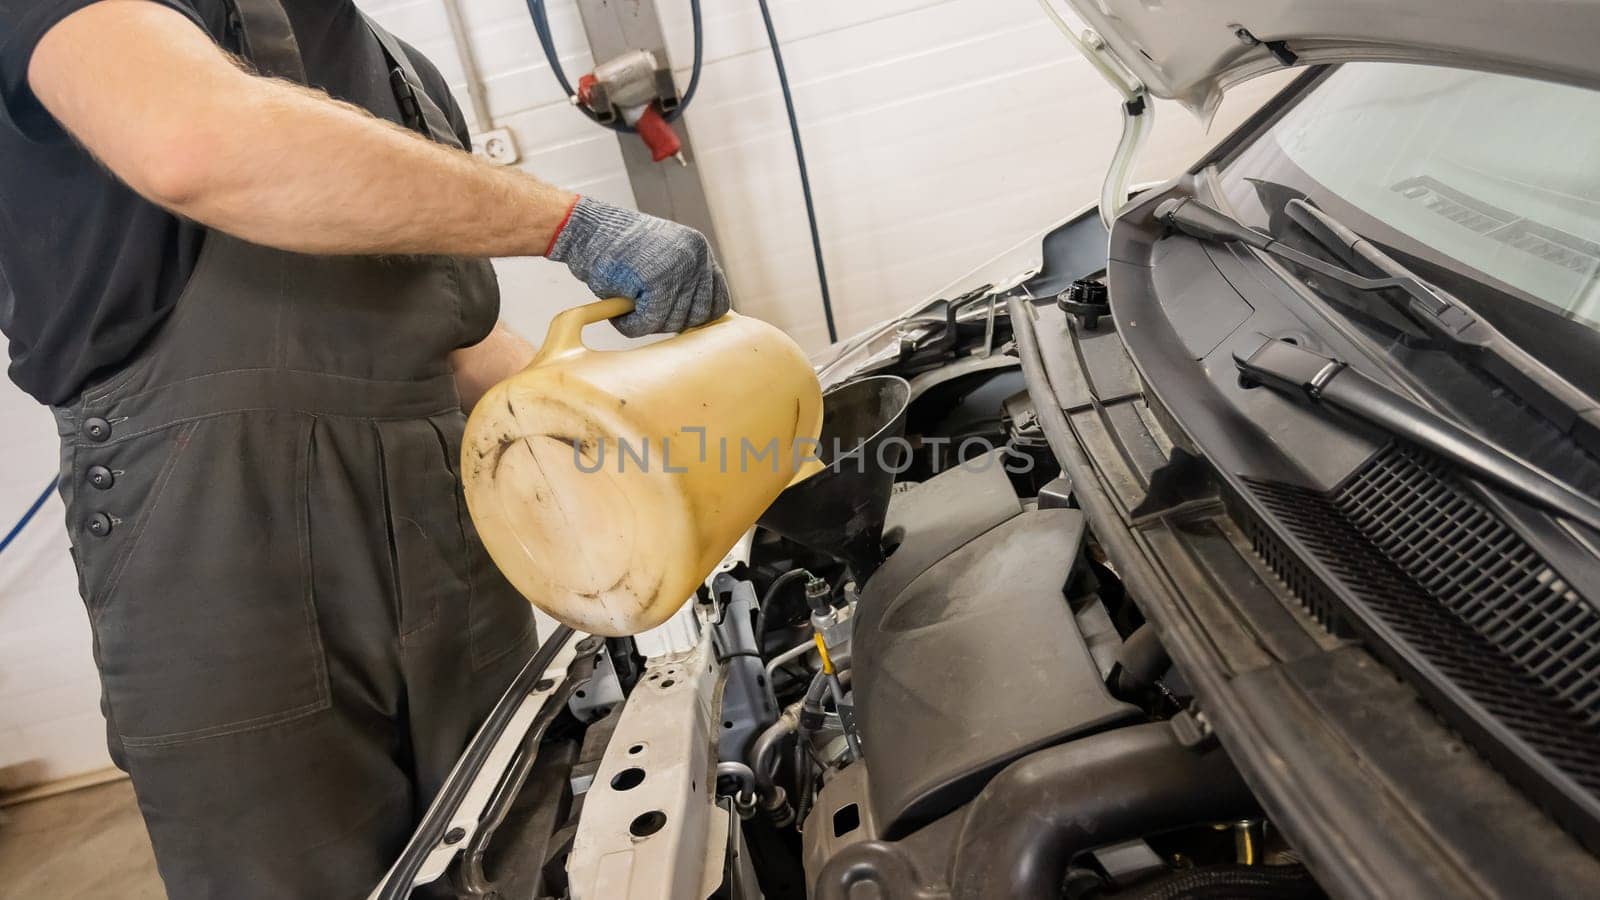 A mechanic fills a car engine with oil. Close-up of a man's hands. by mrwed54